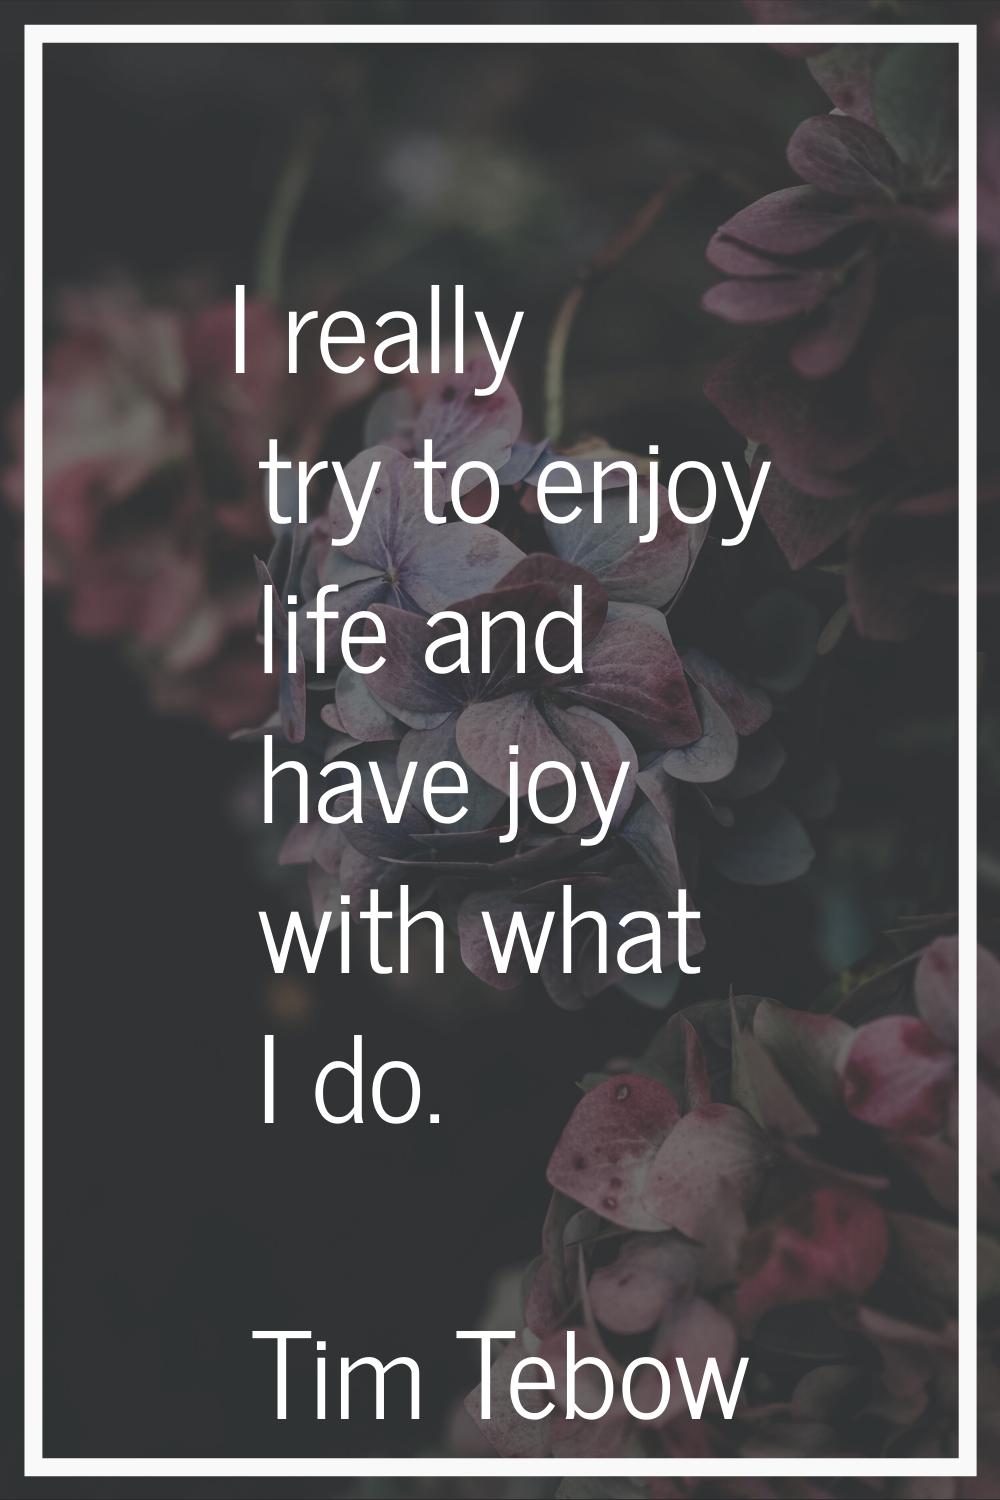 I really try to enjoy life and have joy with what I do.